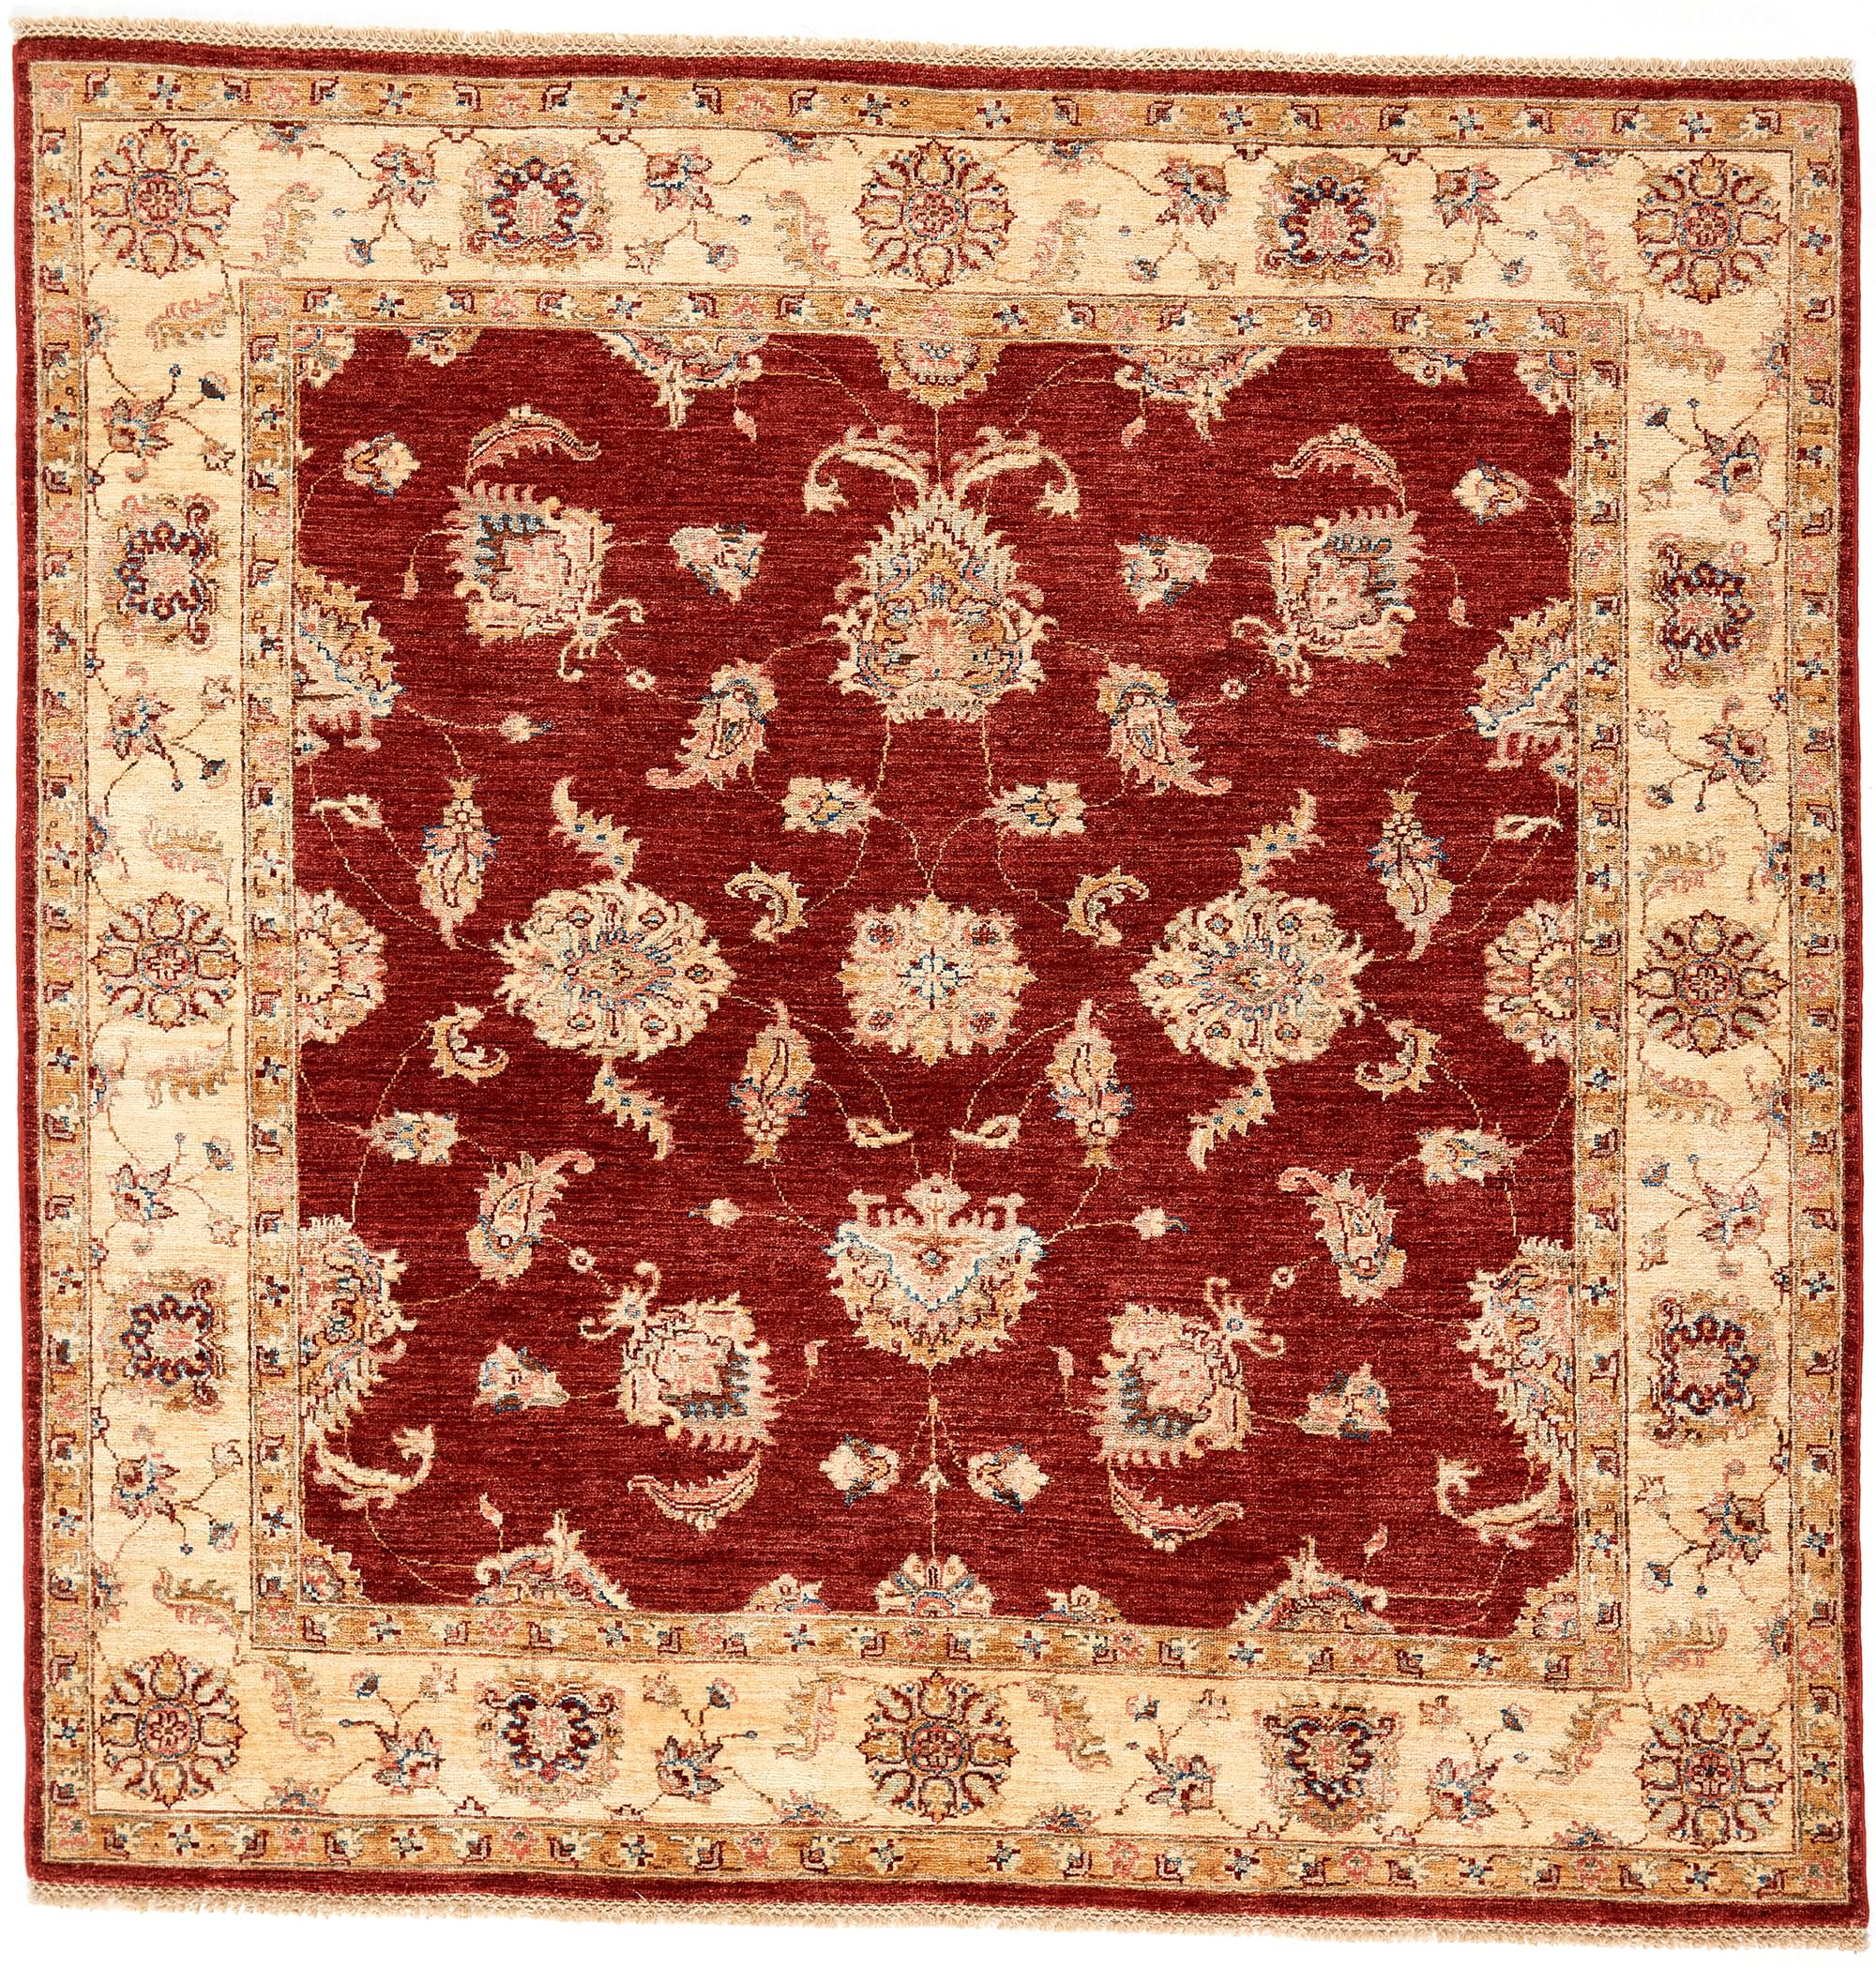 square oriental rug with red and beige floral pattern